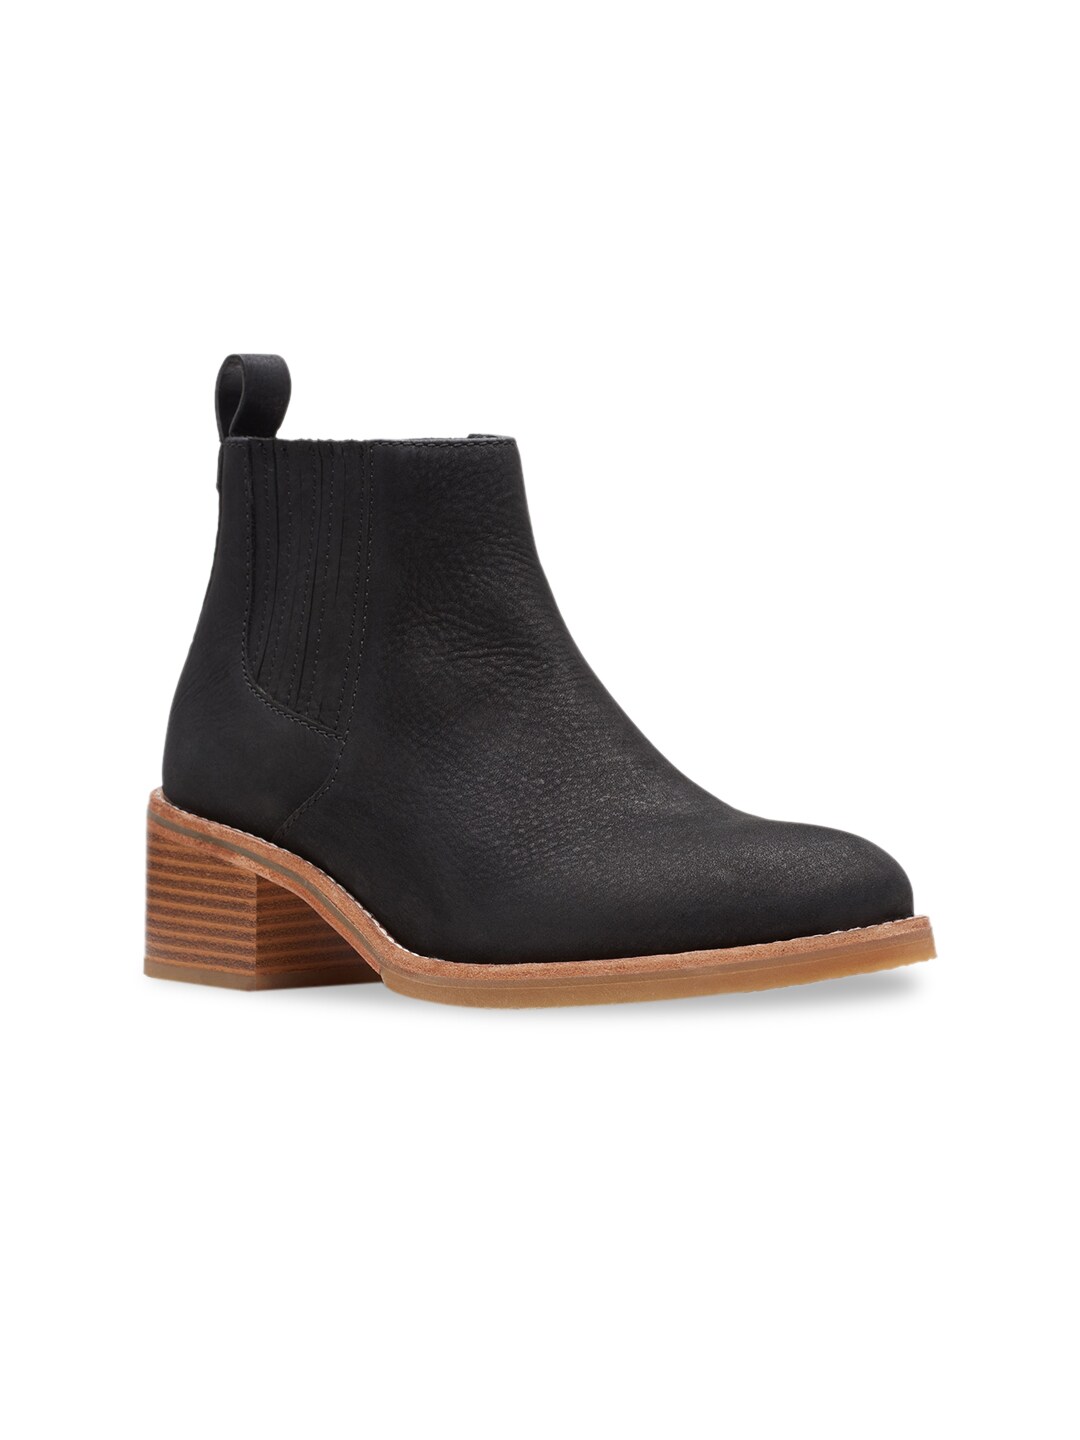 Clarks Black Leather Block Heeled Boots Price in India